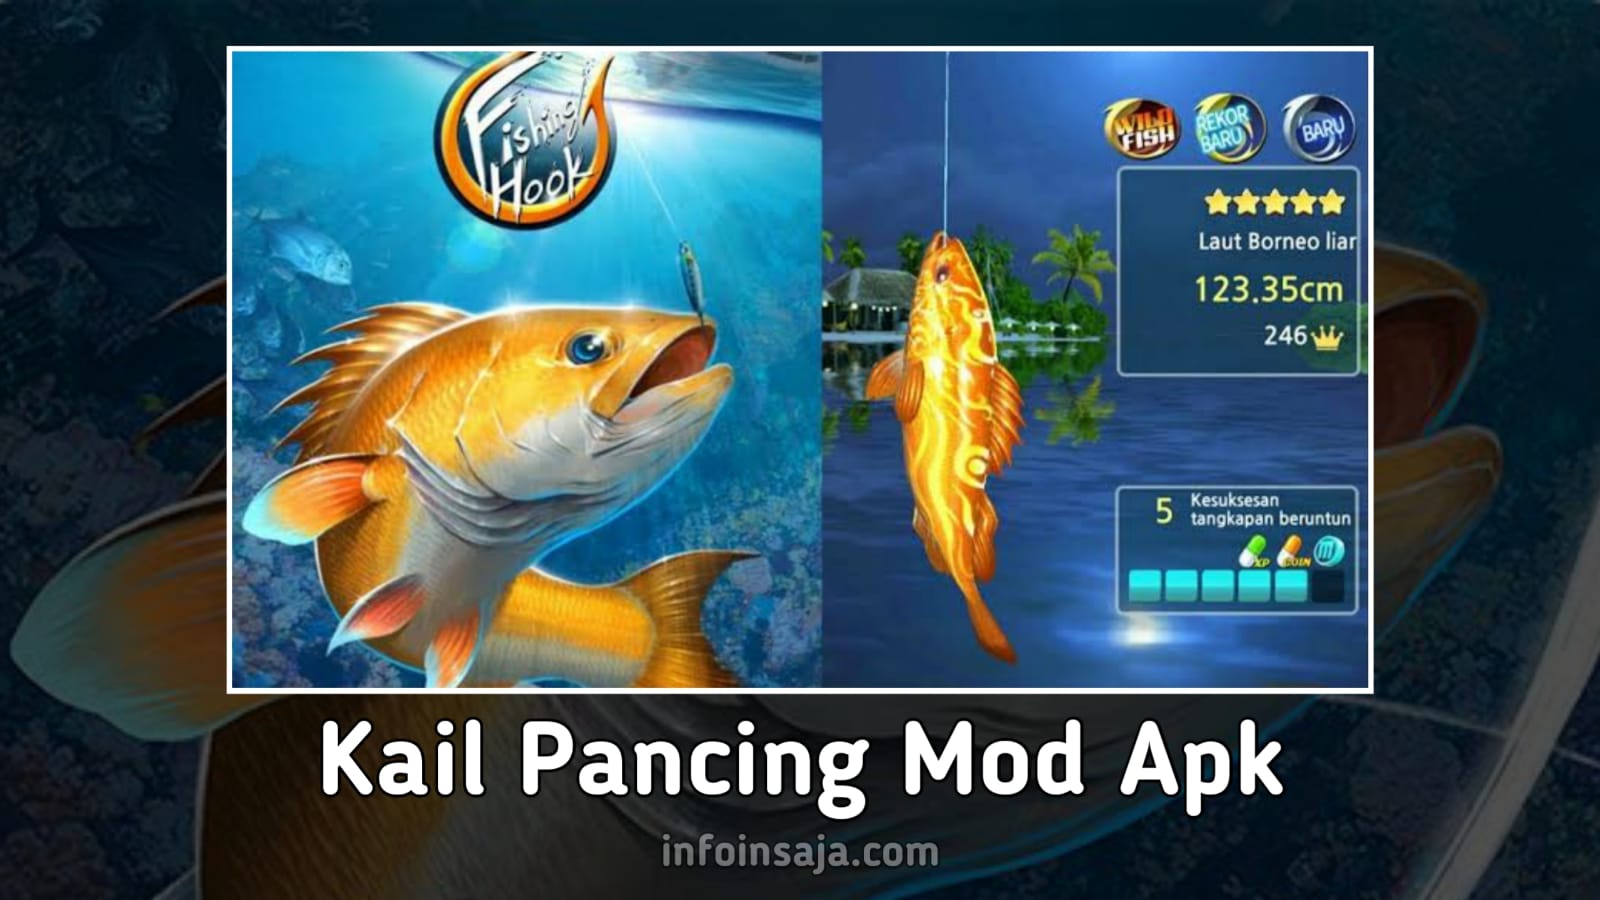 Kail Pancing Mod Apk Unlimited Money